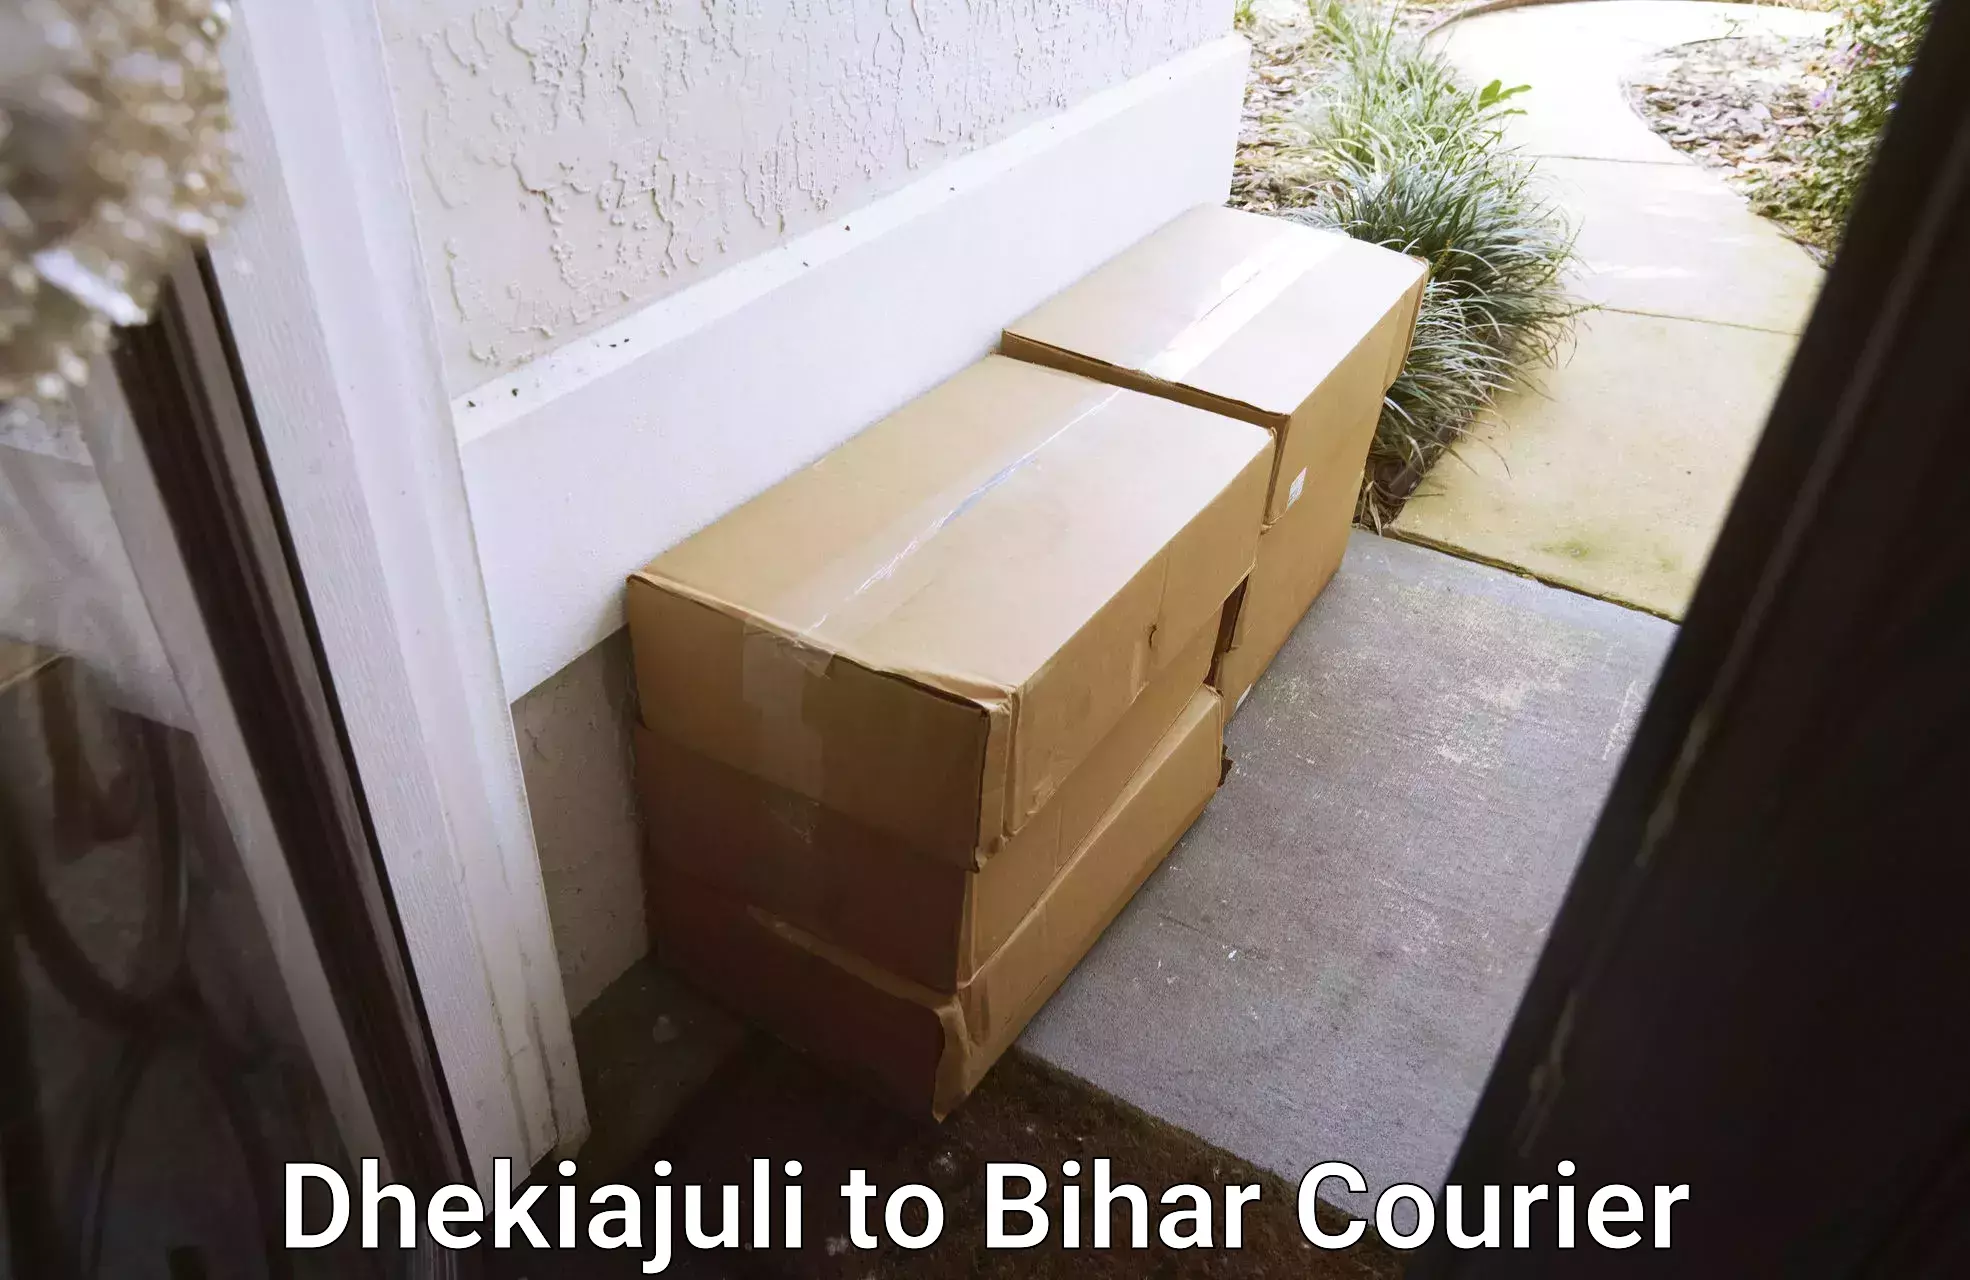 State-of-the-art courier technology Dhekiajuli to Bettiah